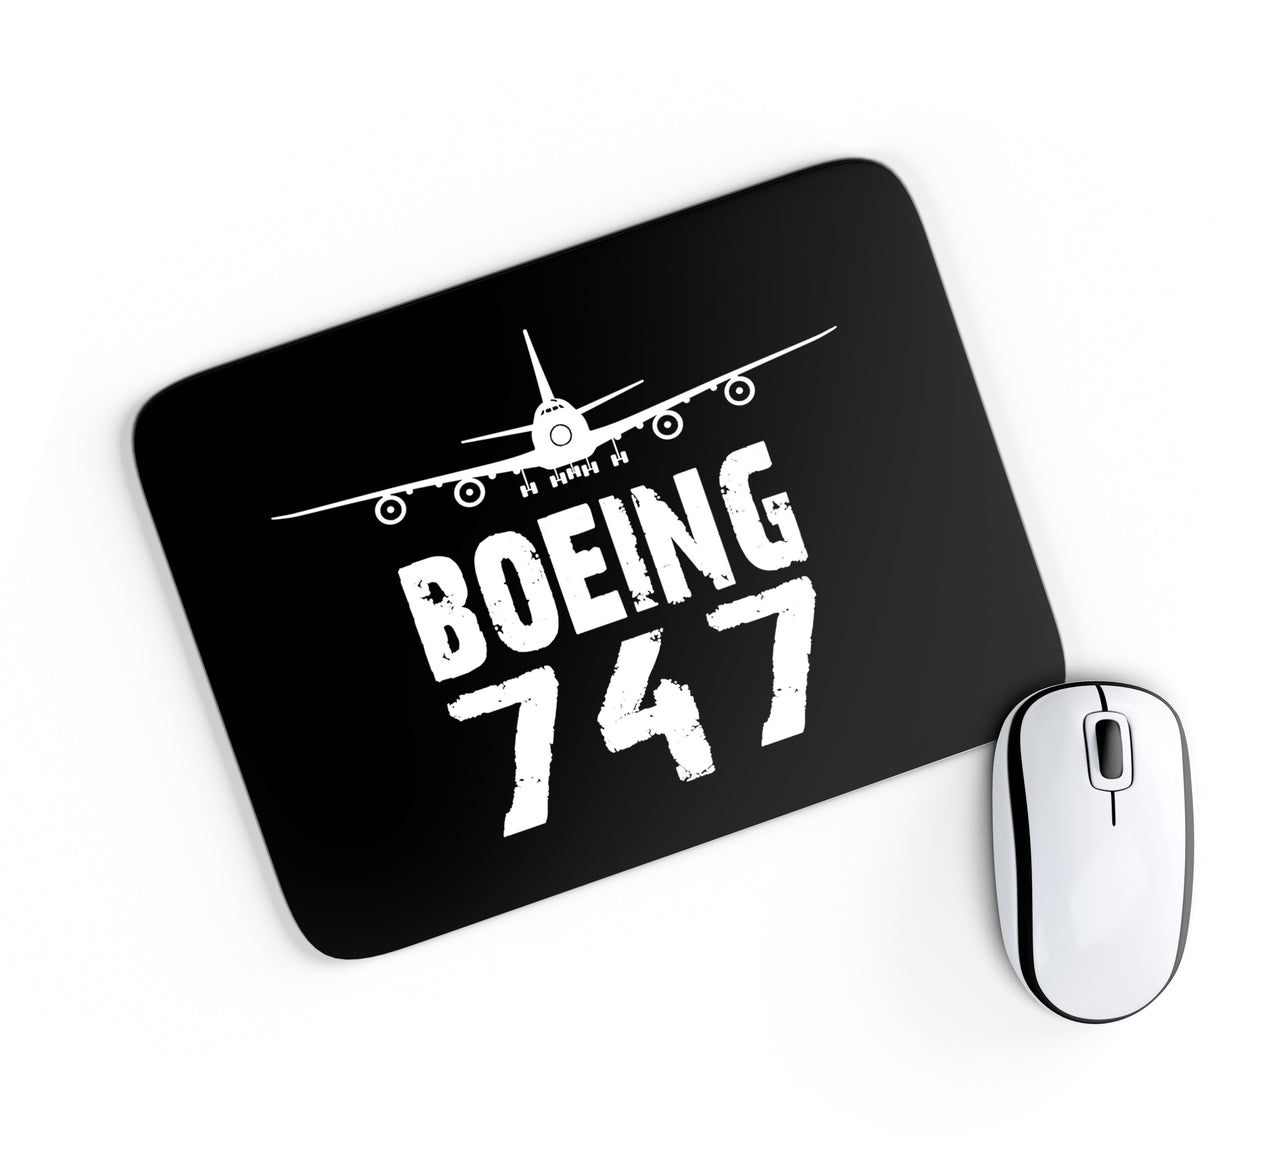 Boeing 747 & Plane Designed Mouse Pads